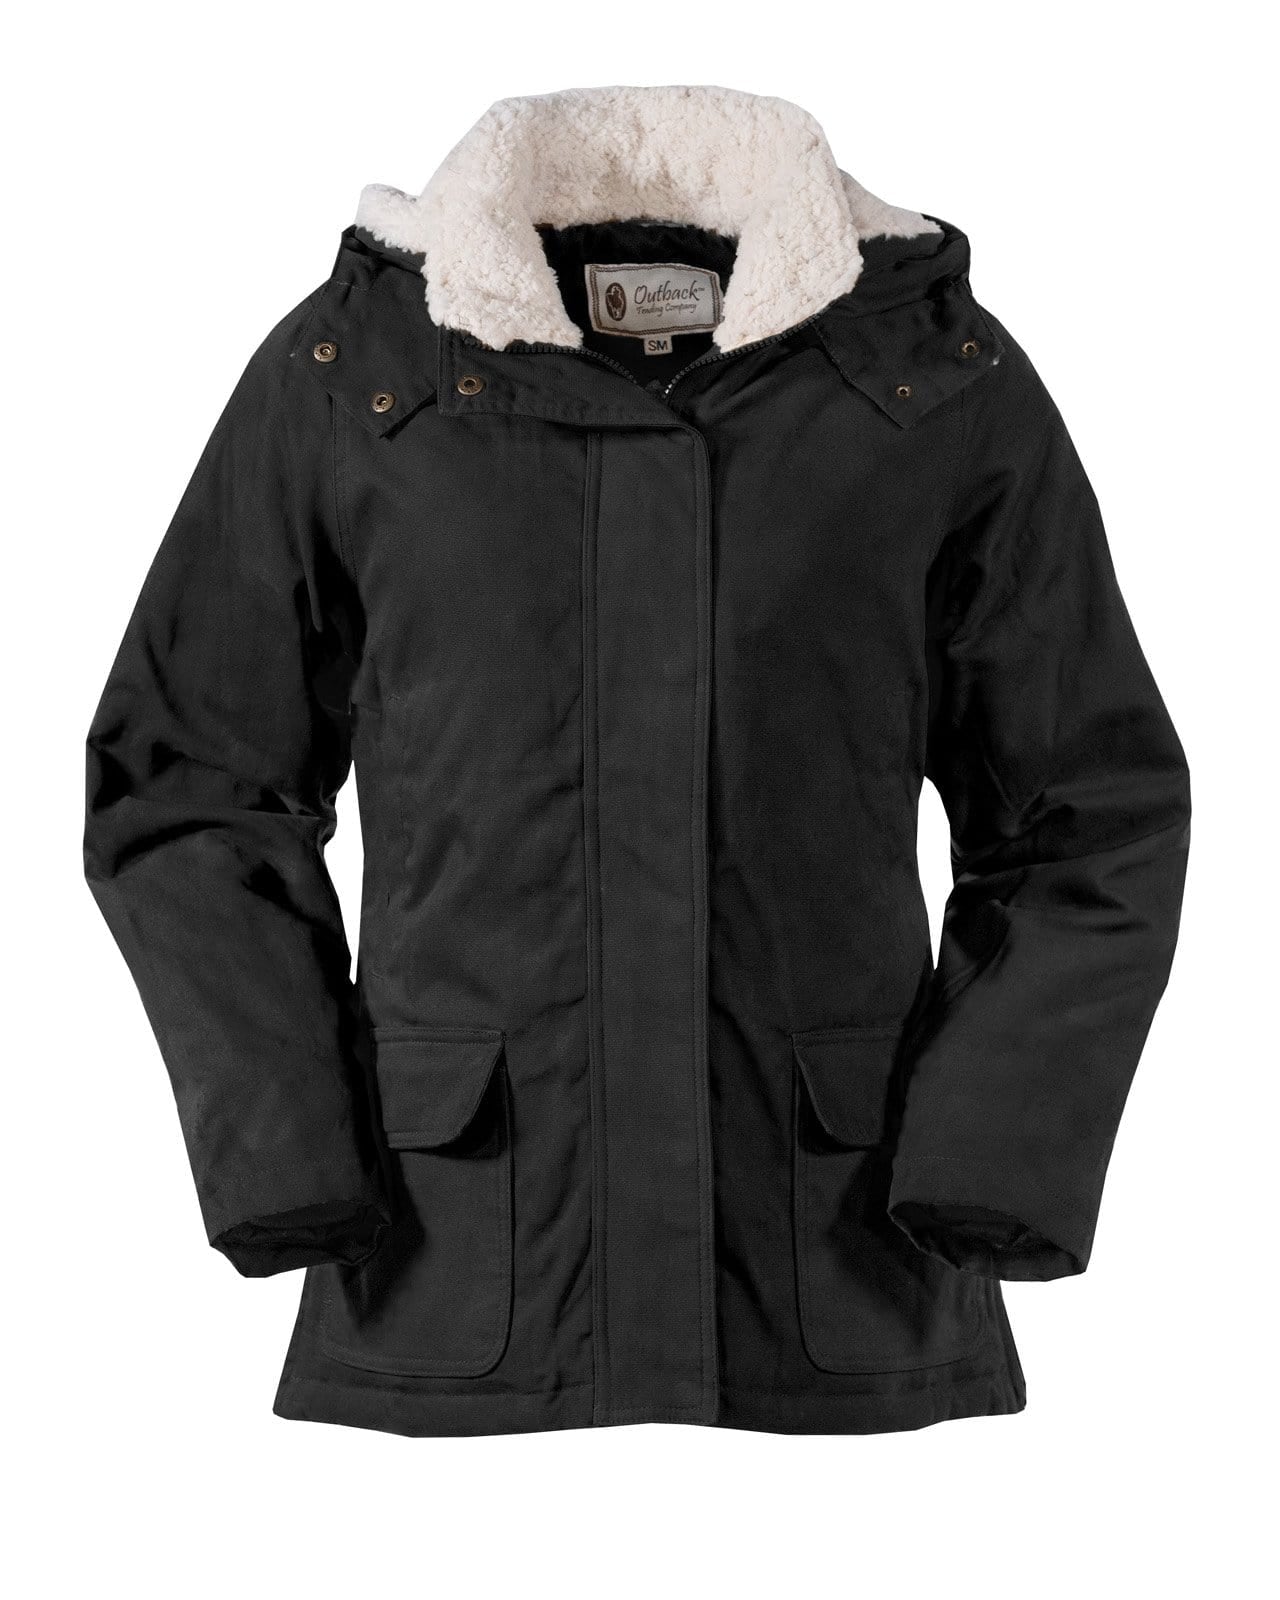 The Outback Oversized Puffer Jacket